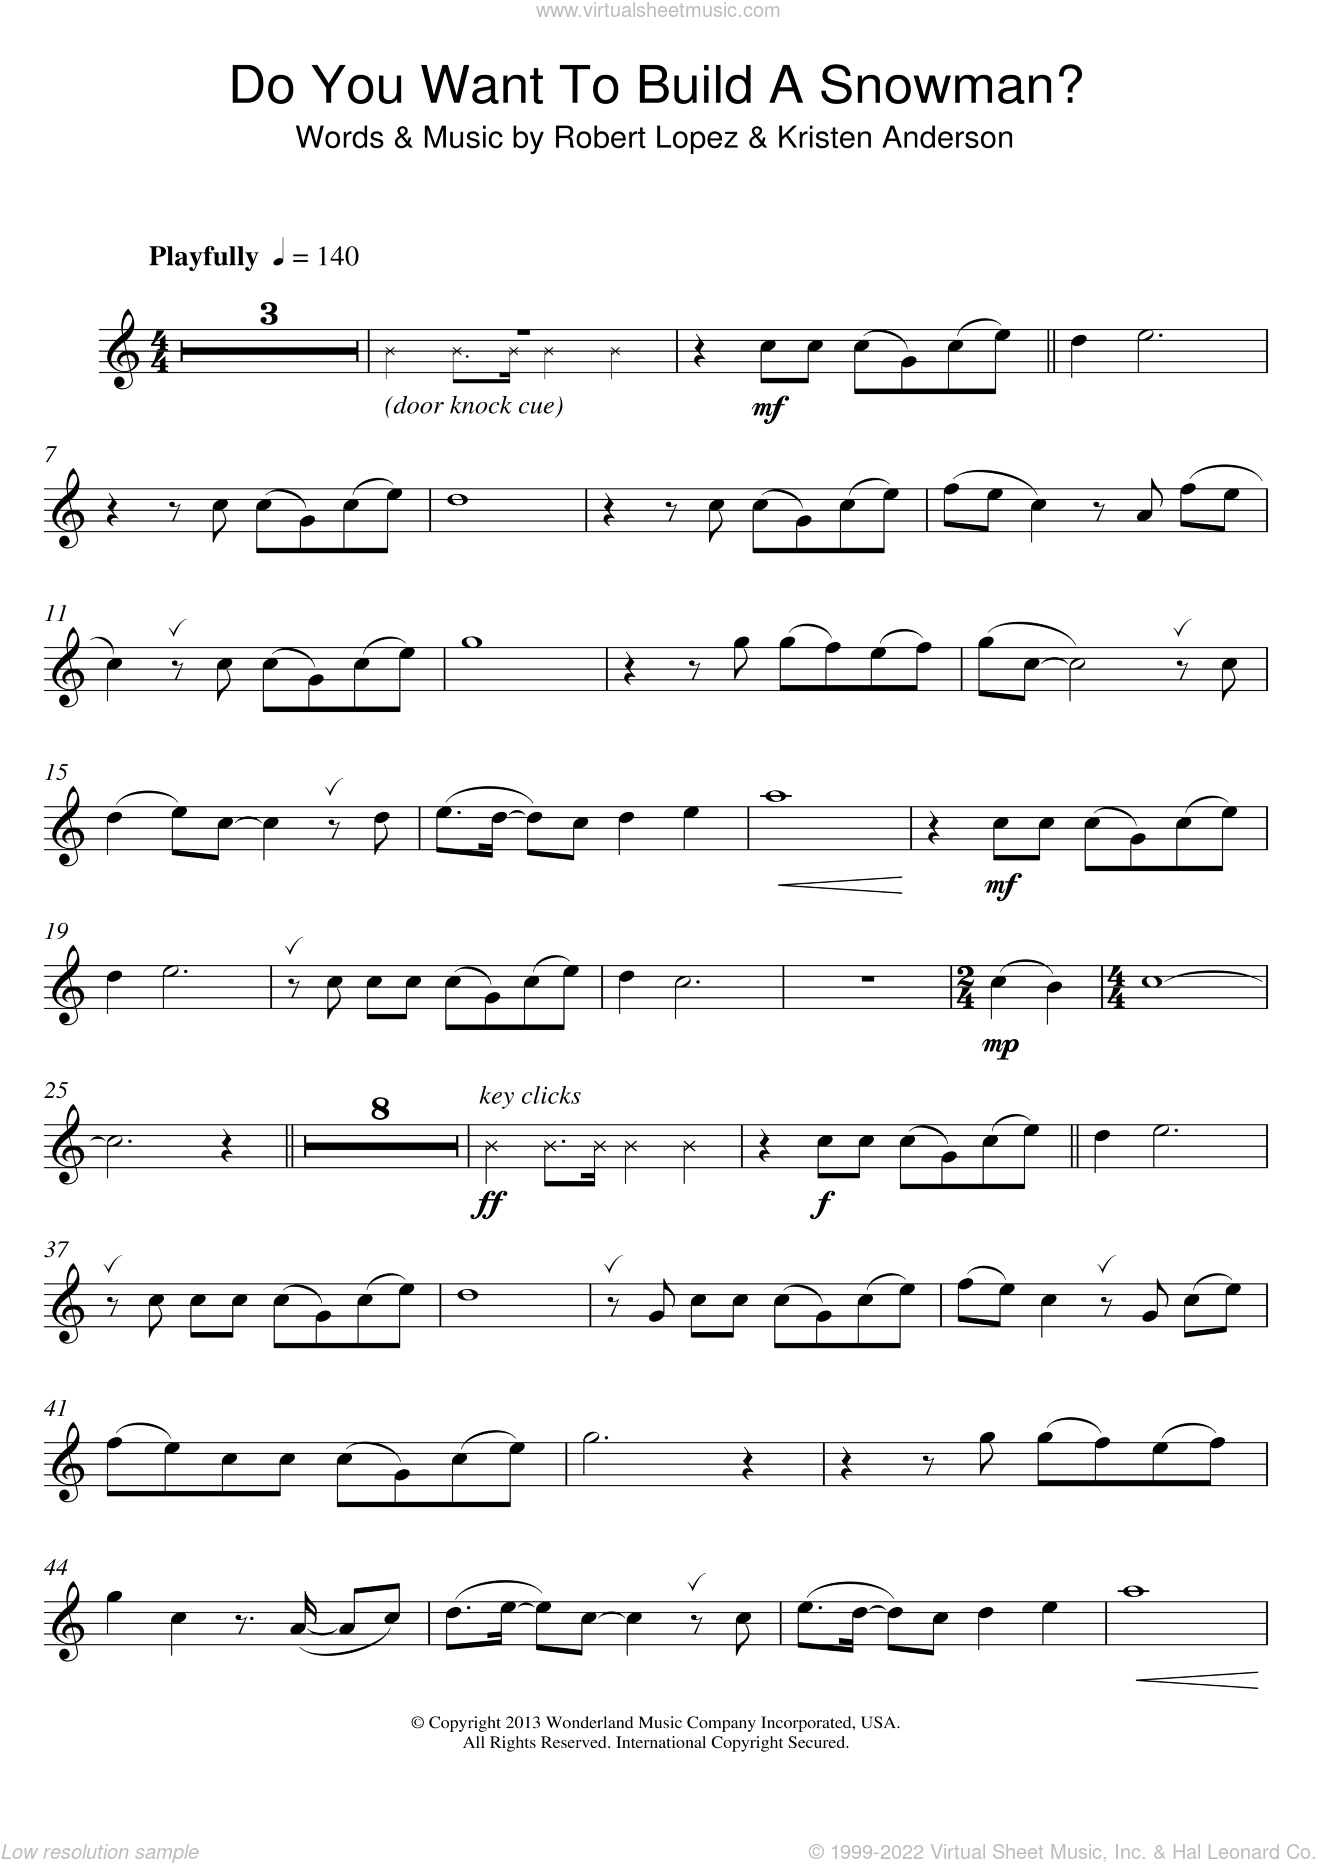 Do You Want To Build A Snowman? (from Frozen) sheet music for alto